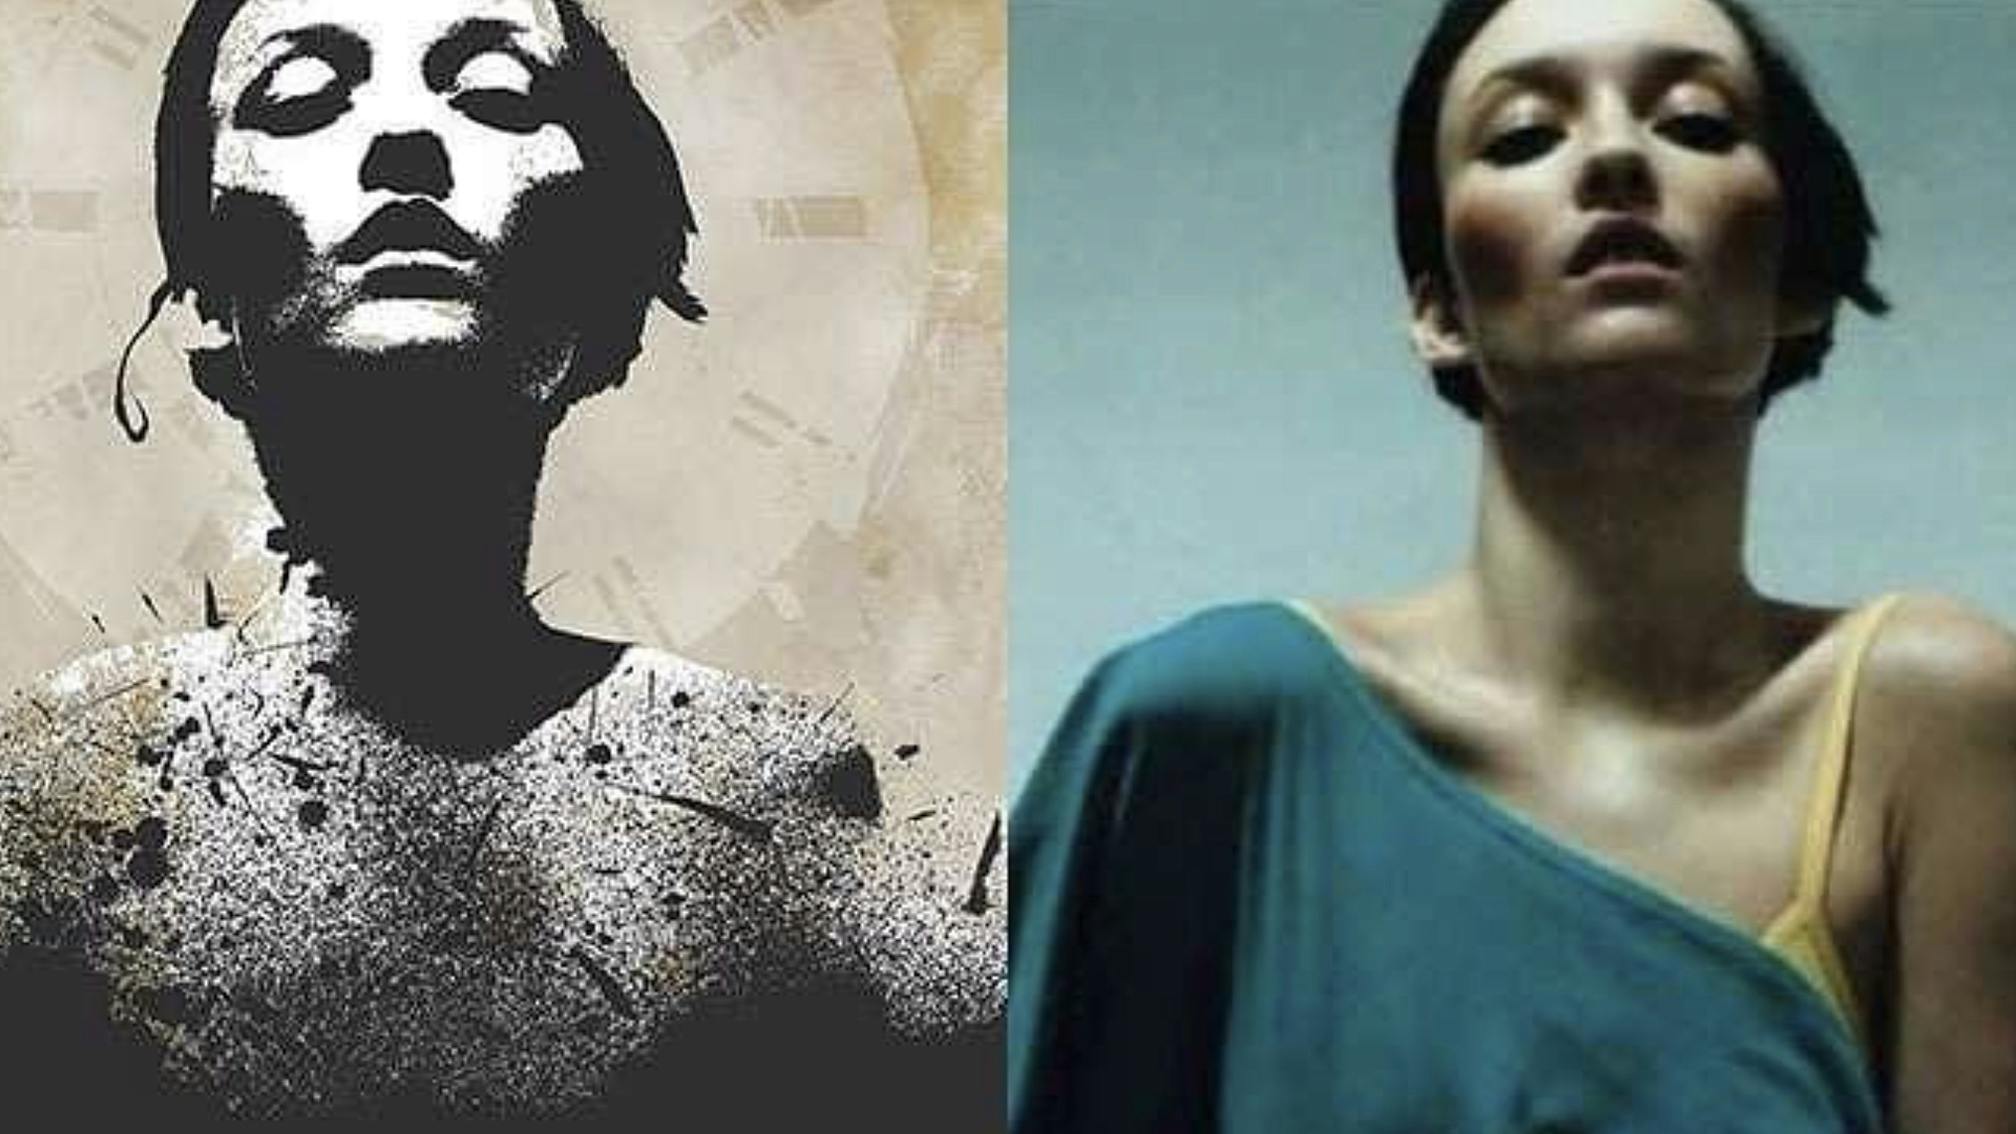 Model from Converge's Jane Doe cover reveals herself after 20 years; Jacob Bannon responds